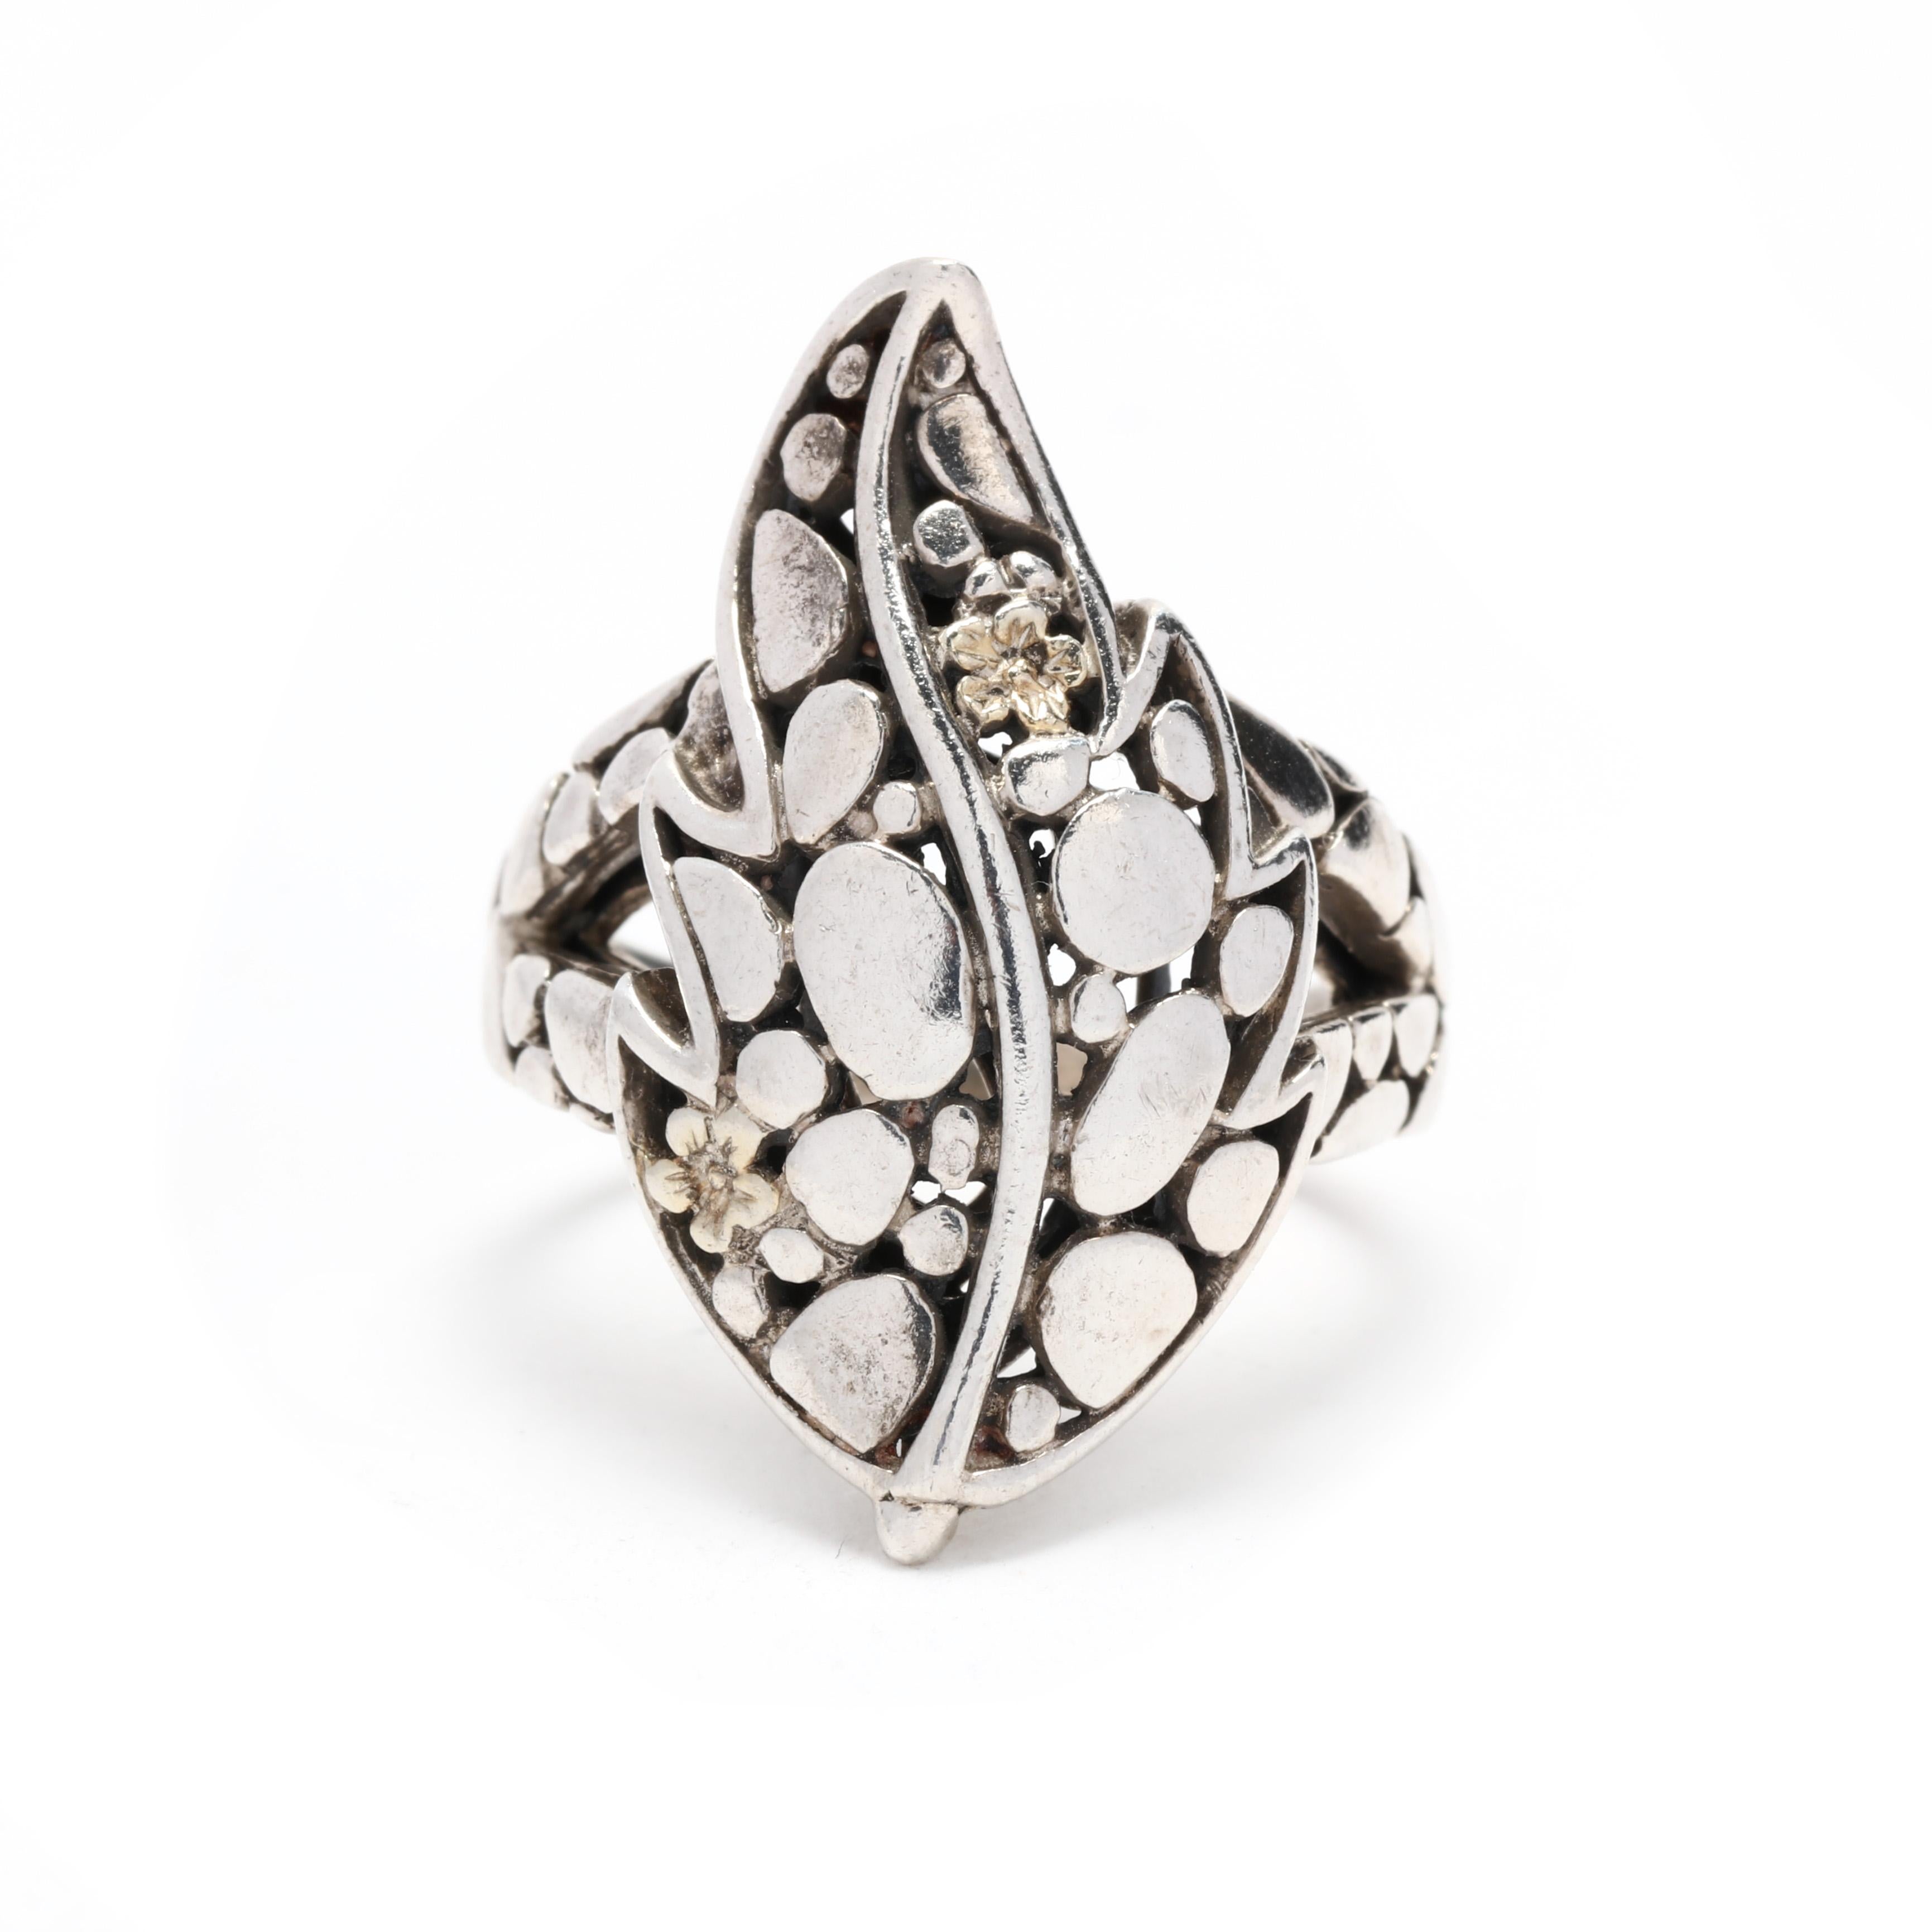 A vintage sterling silver dot leaf motif statement ring. This long silver ring features a leaf design with a dot and floral motif throughout and a split band.

Ring Size  8

Length: 1 1/8 in.

Weight: 5.45 dwts. / 8.5 grams

Ring Sizings &